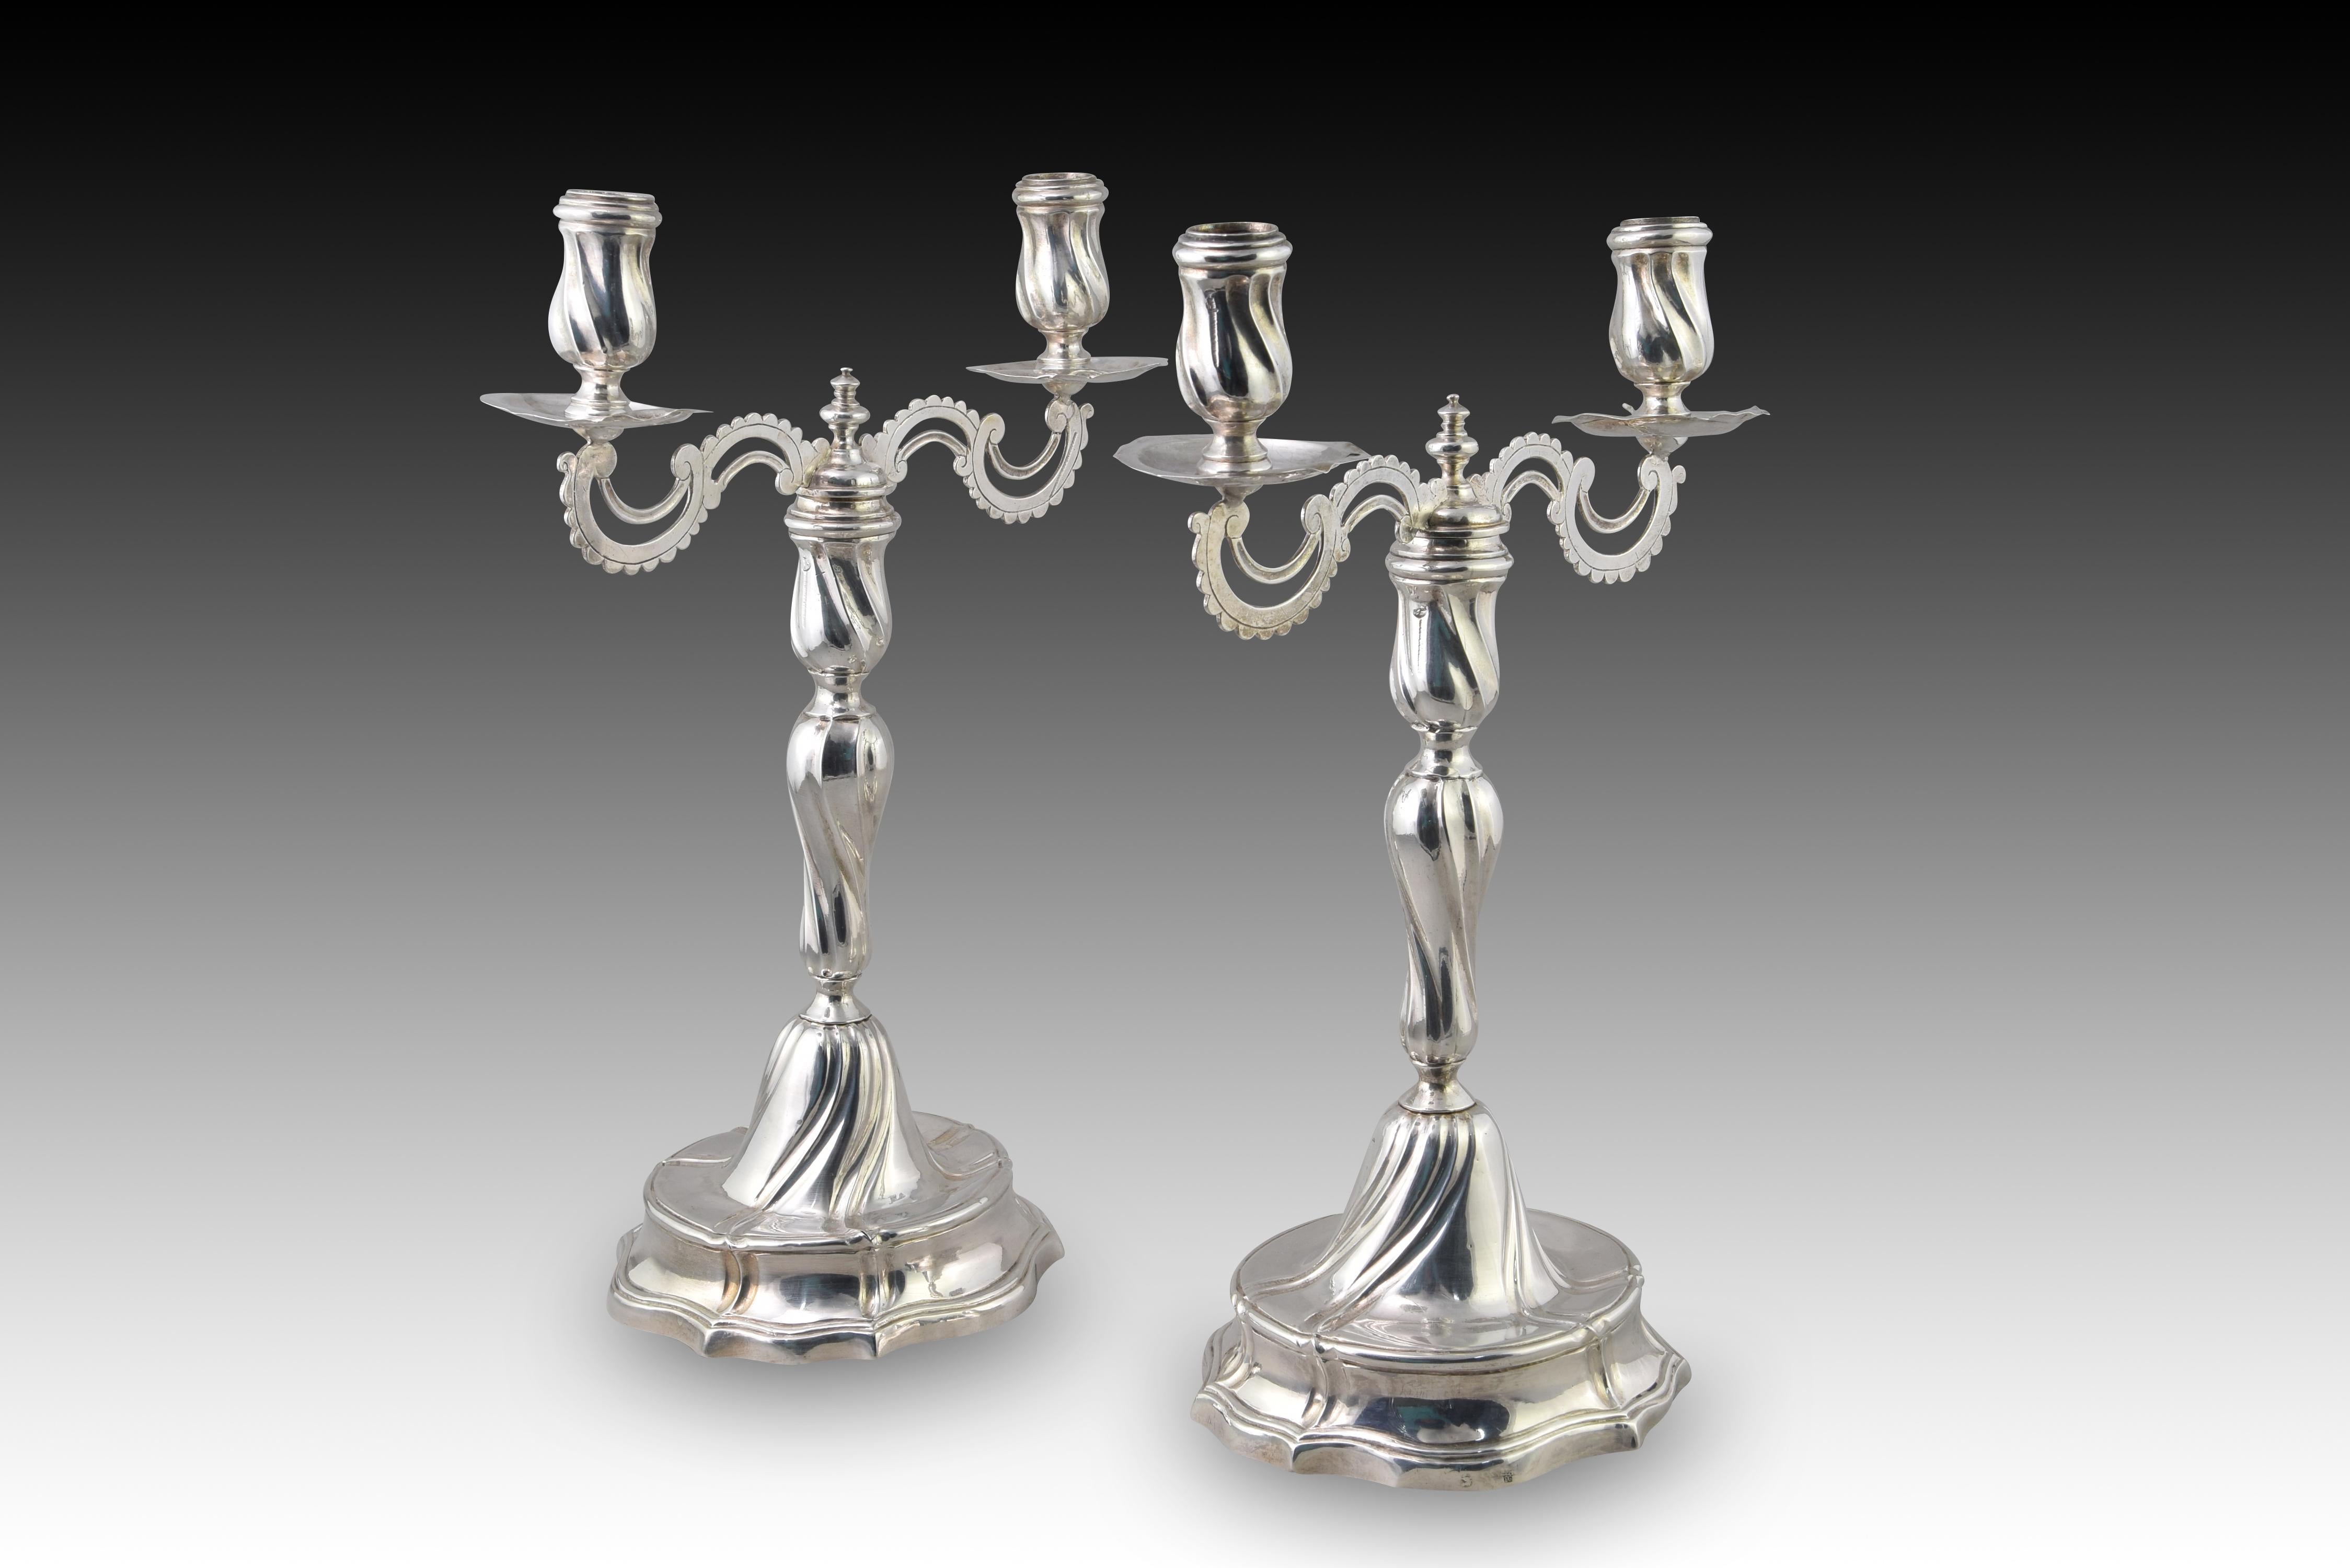 Pair of convertible candlesticks. Silver. MARTINEZ MORENO, Mateo; MUÑOZ. Cordoba, Spain, 1793. 
With contrast and chisel marks. 
Pair of silver candlesticks in their color that have pieces to convert them into candlesticks with two lights each. Each